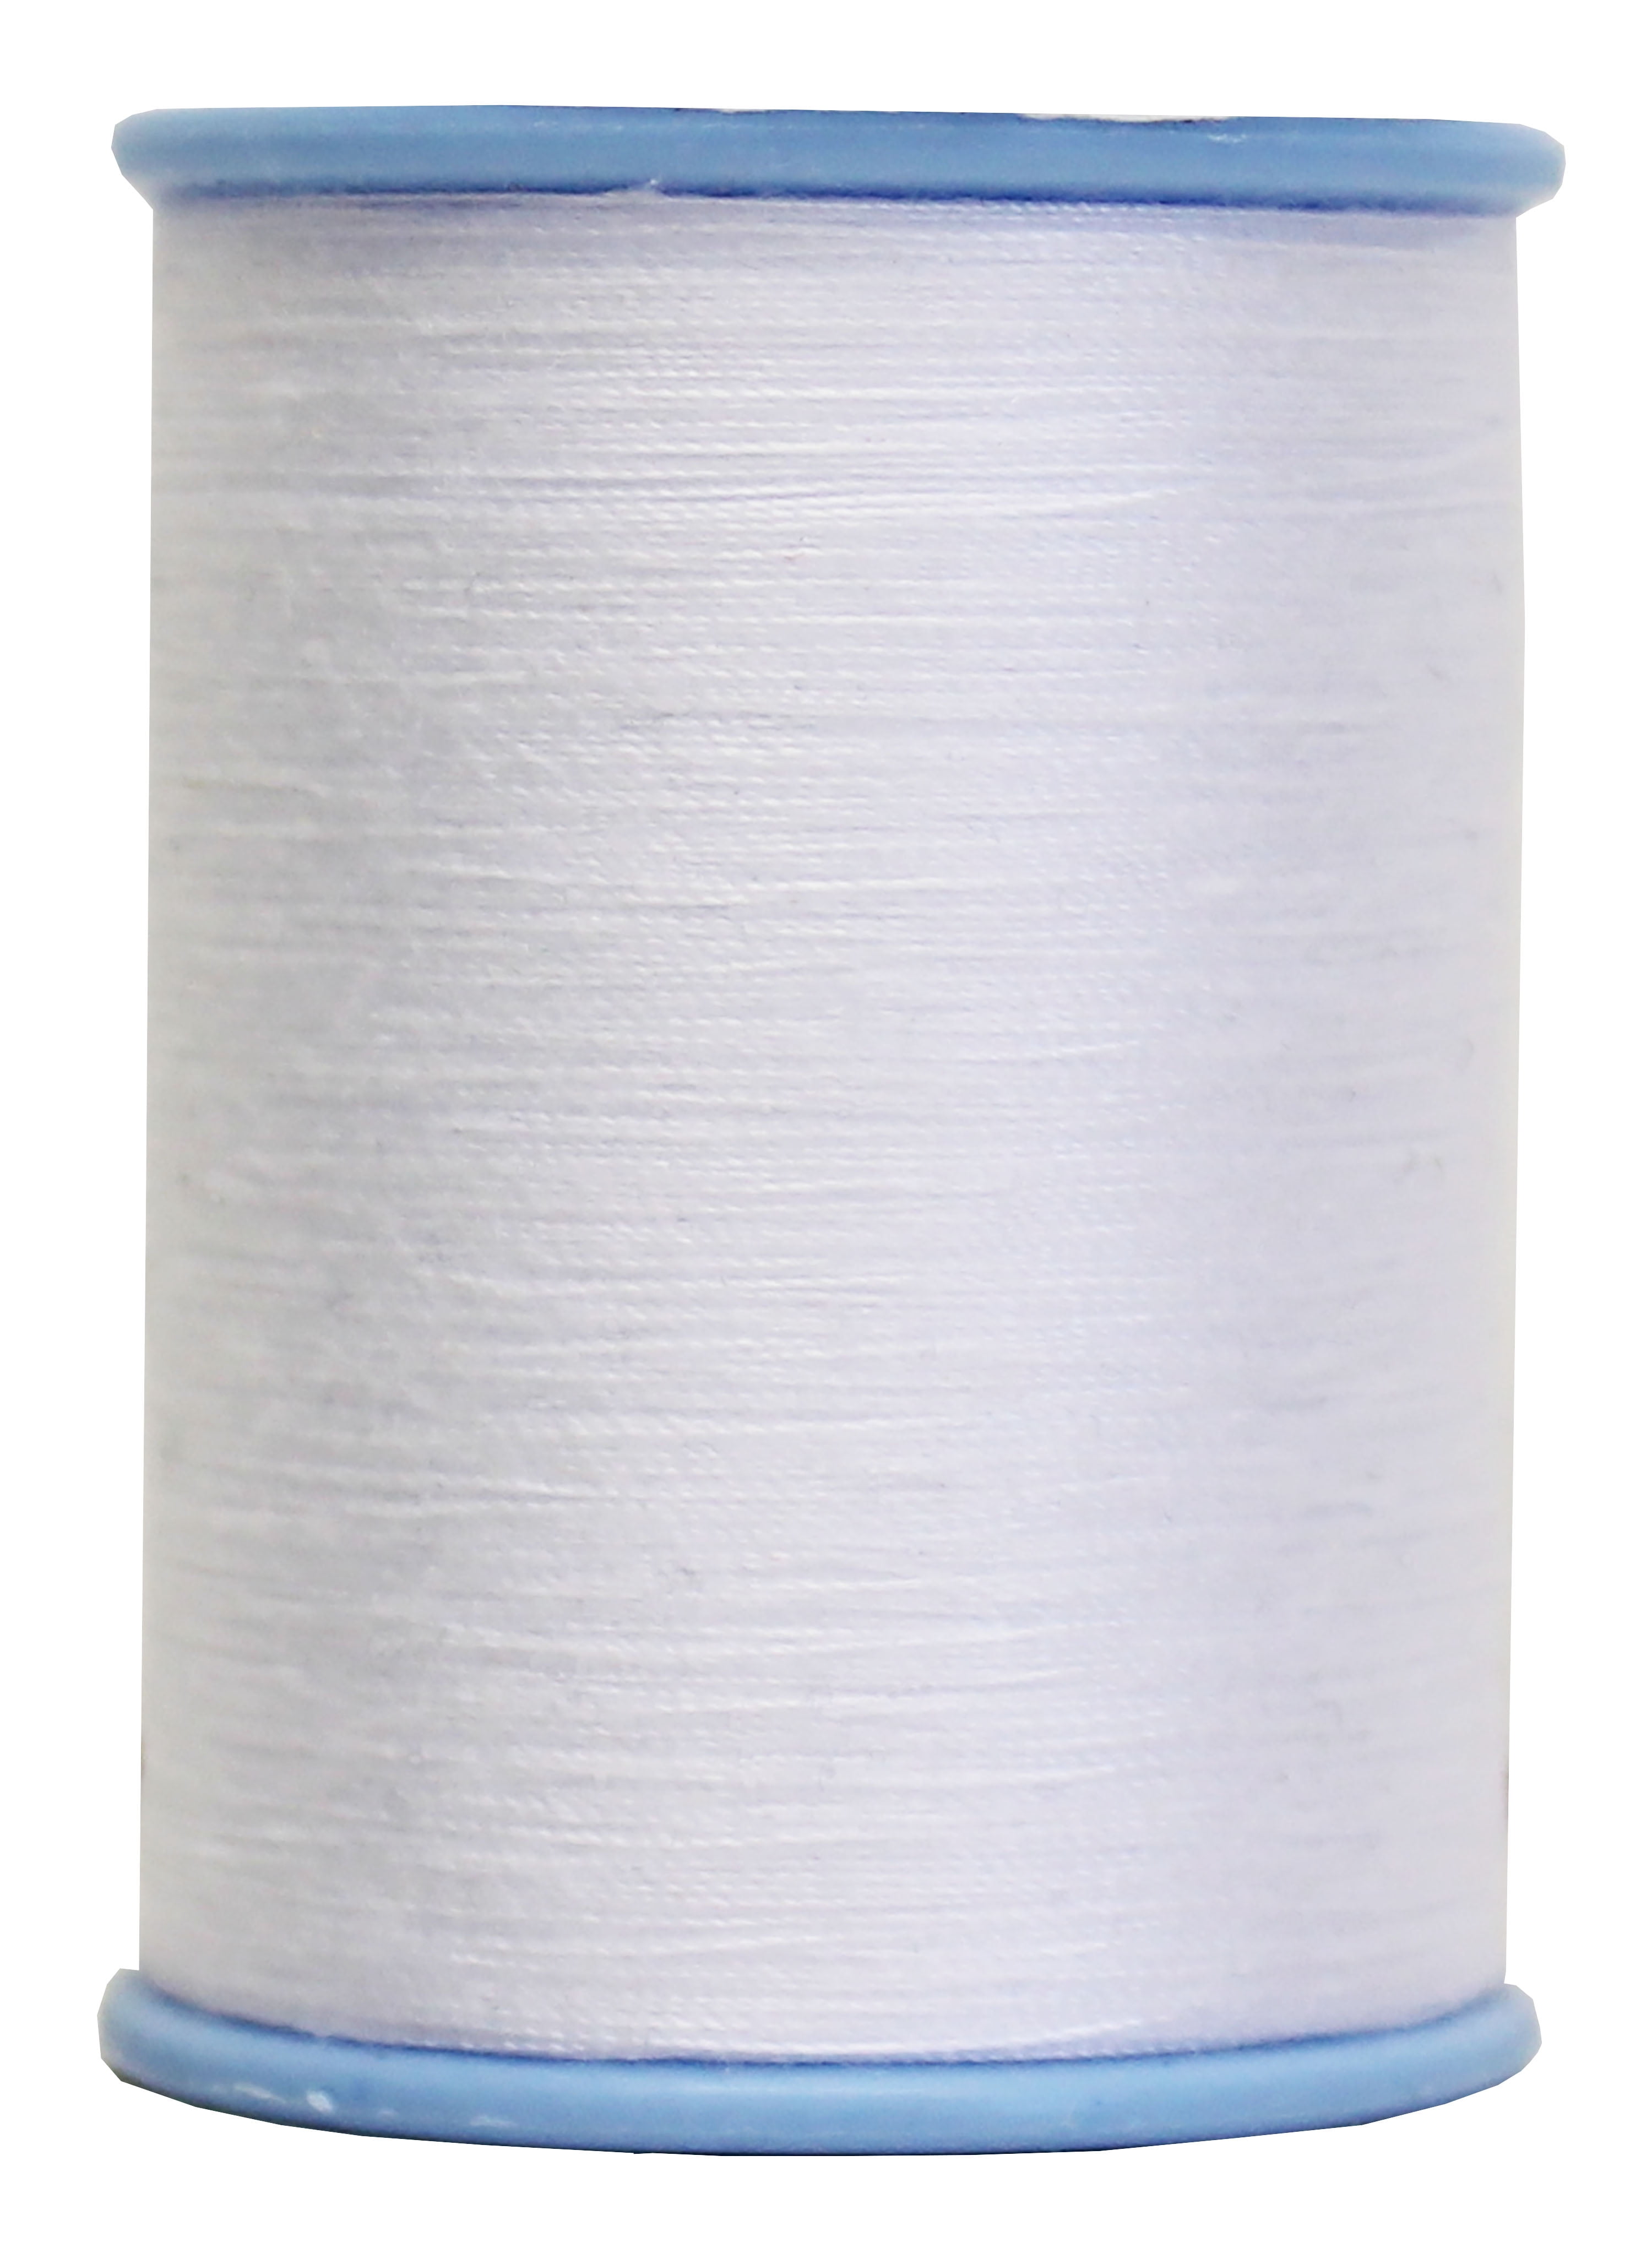 Allary White 100% Polyester Sewing Thread, 200 yd